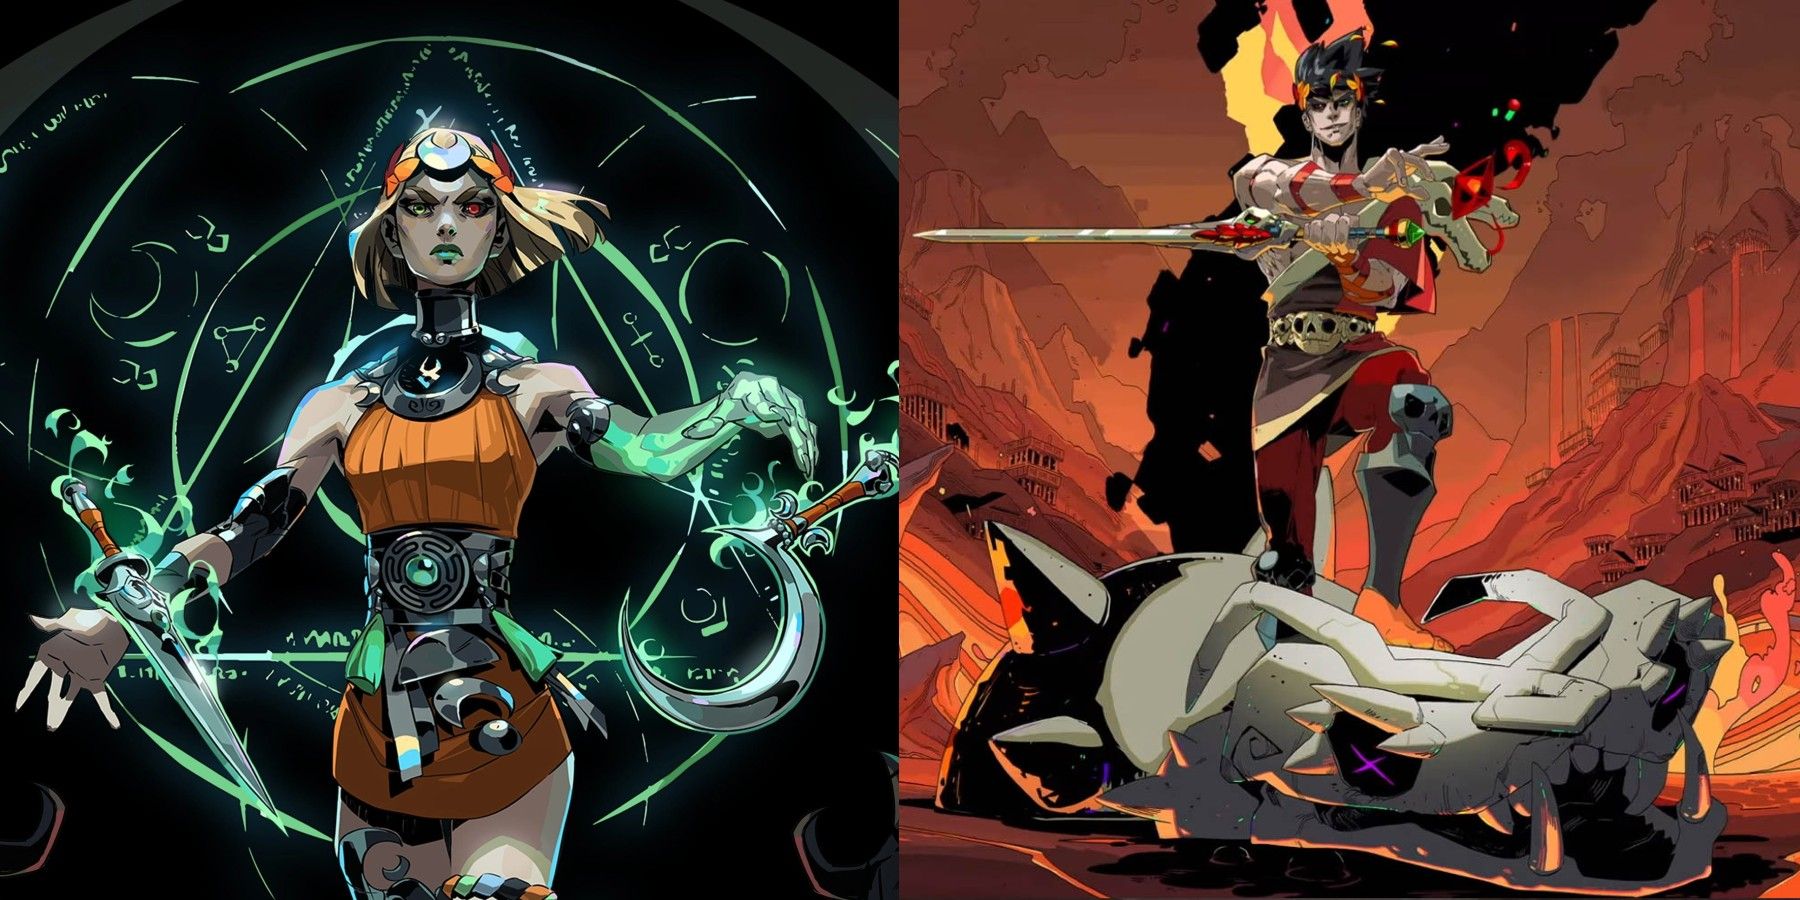 Hades II will star Zagreus' sister Melinoë on a quest to kill time